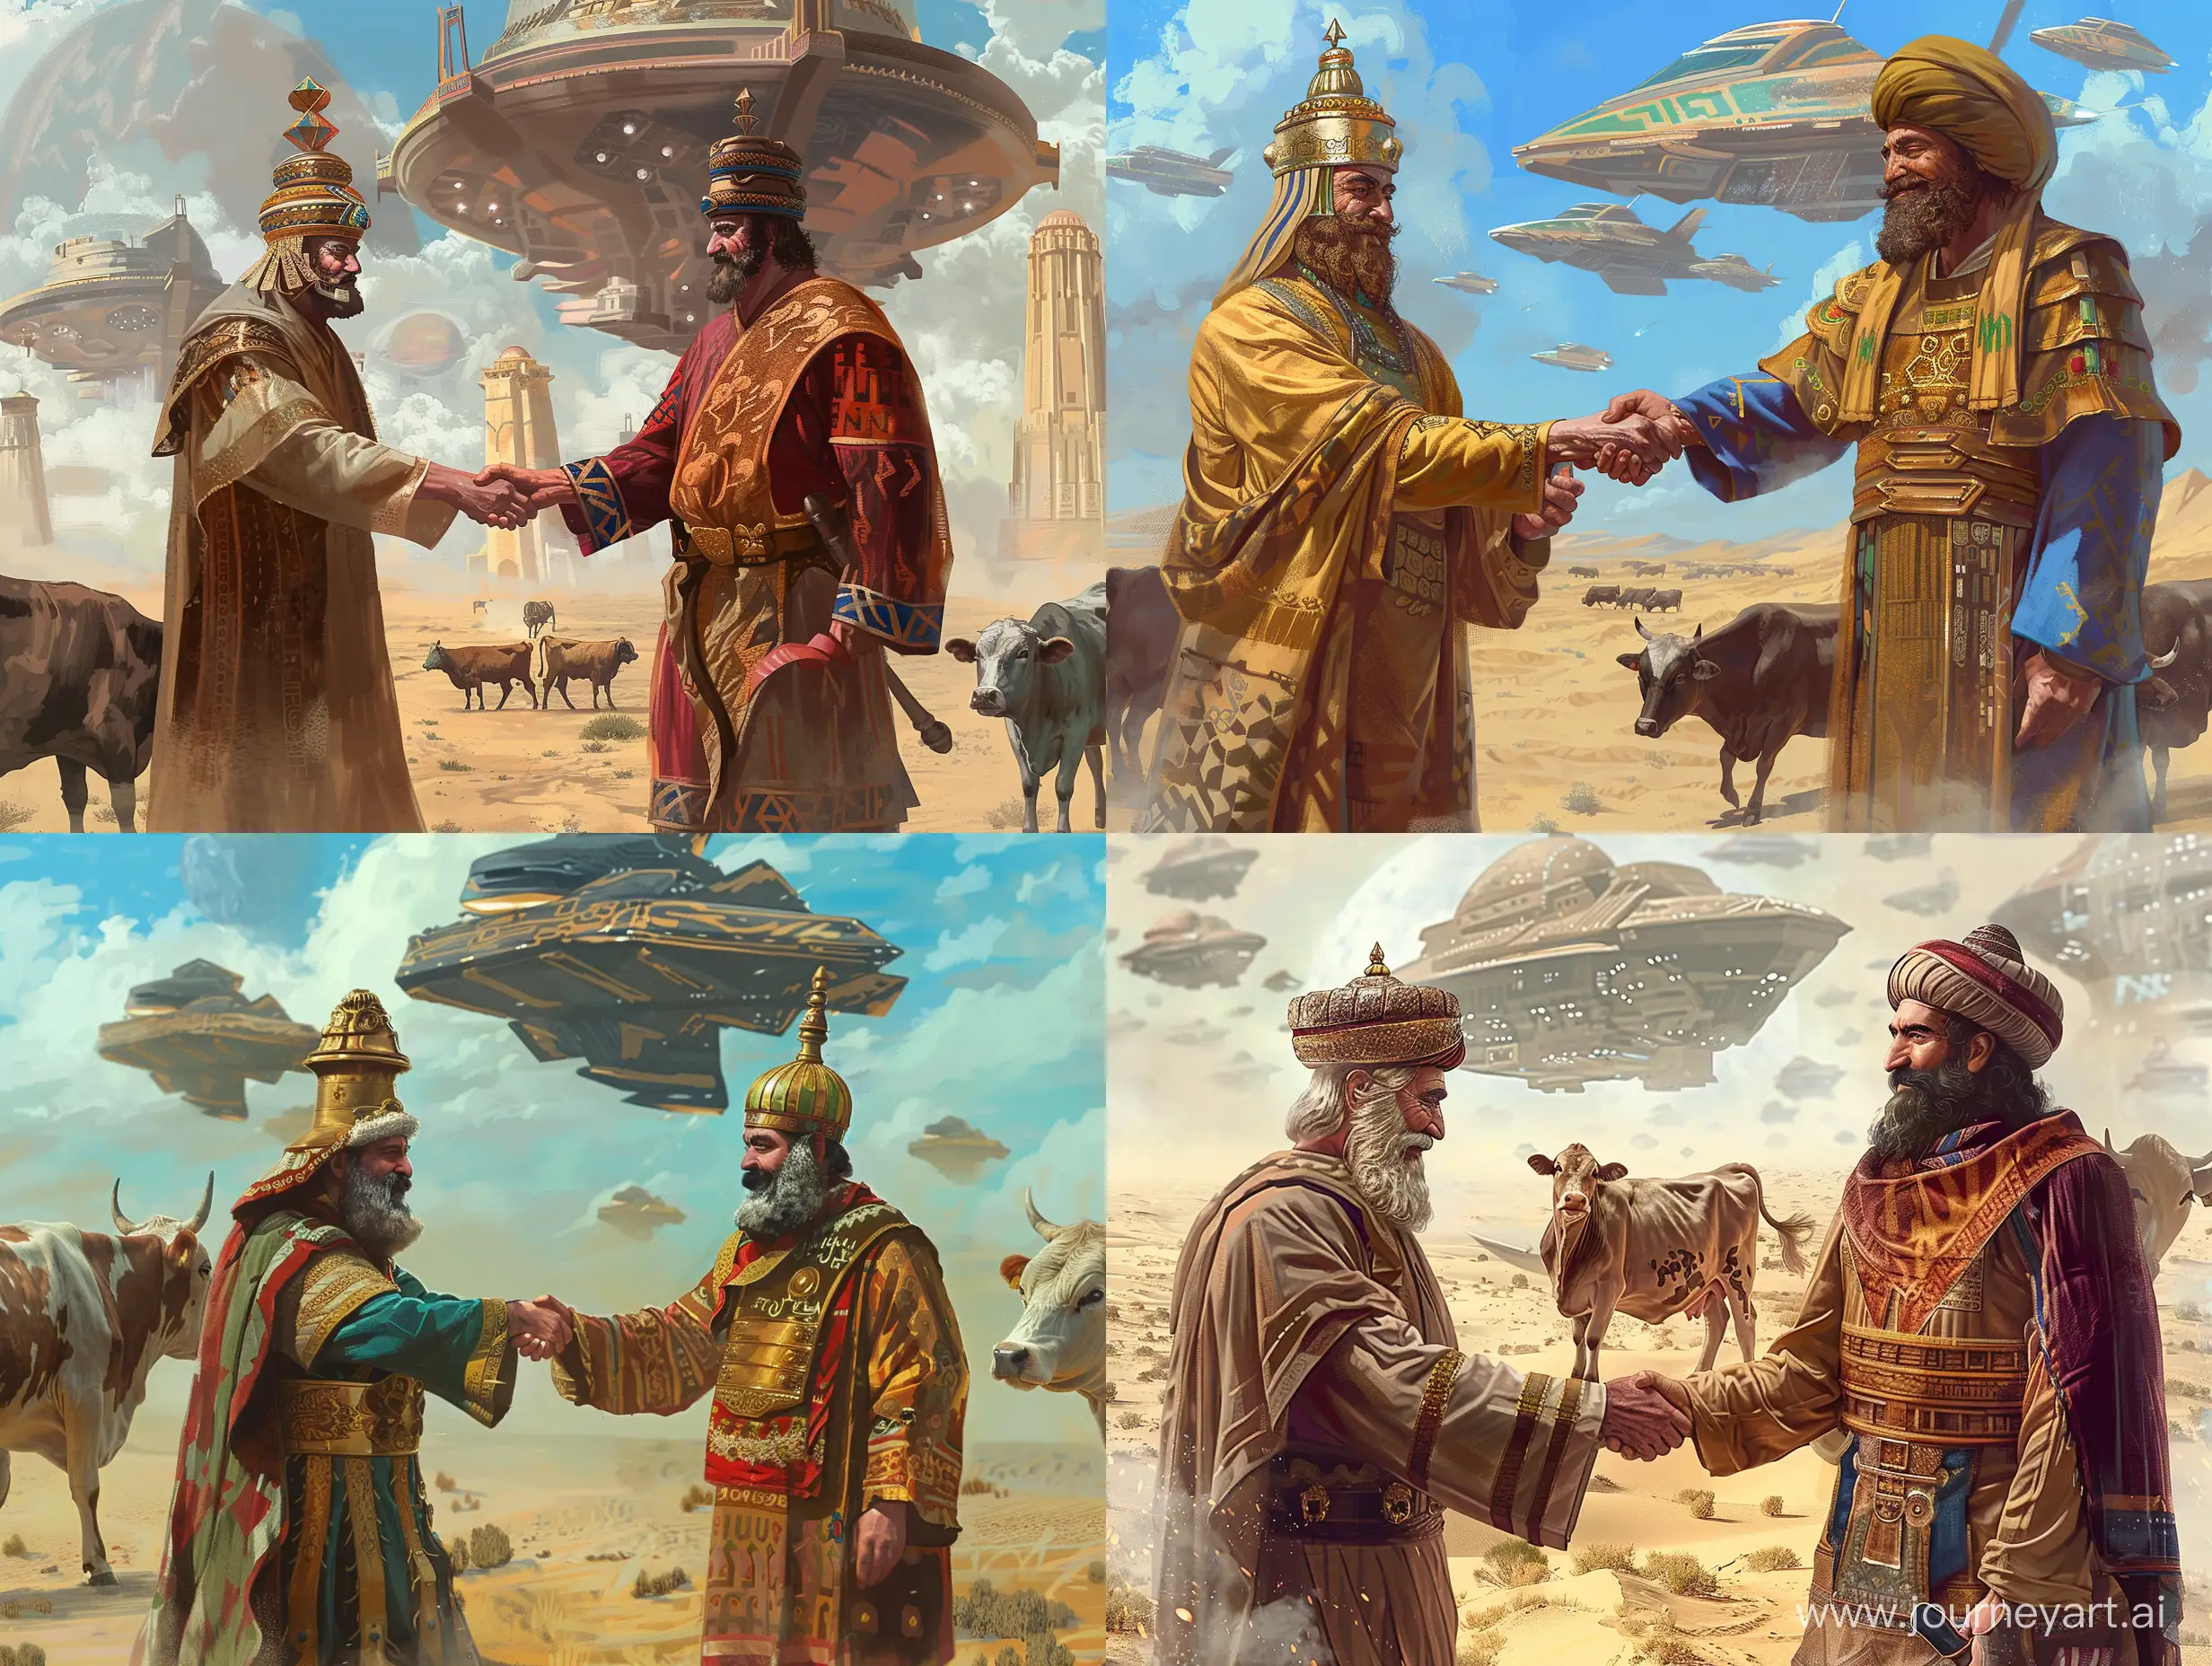 cyrus the great is shaking nadirshah hands and both are smiling, in lut desert,realistic,space ships background is trying to take a cow up,--q2